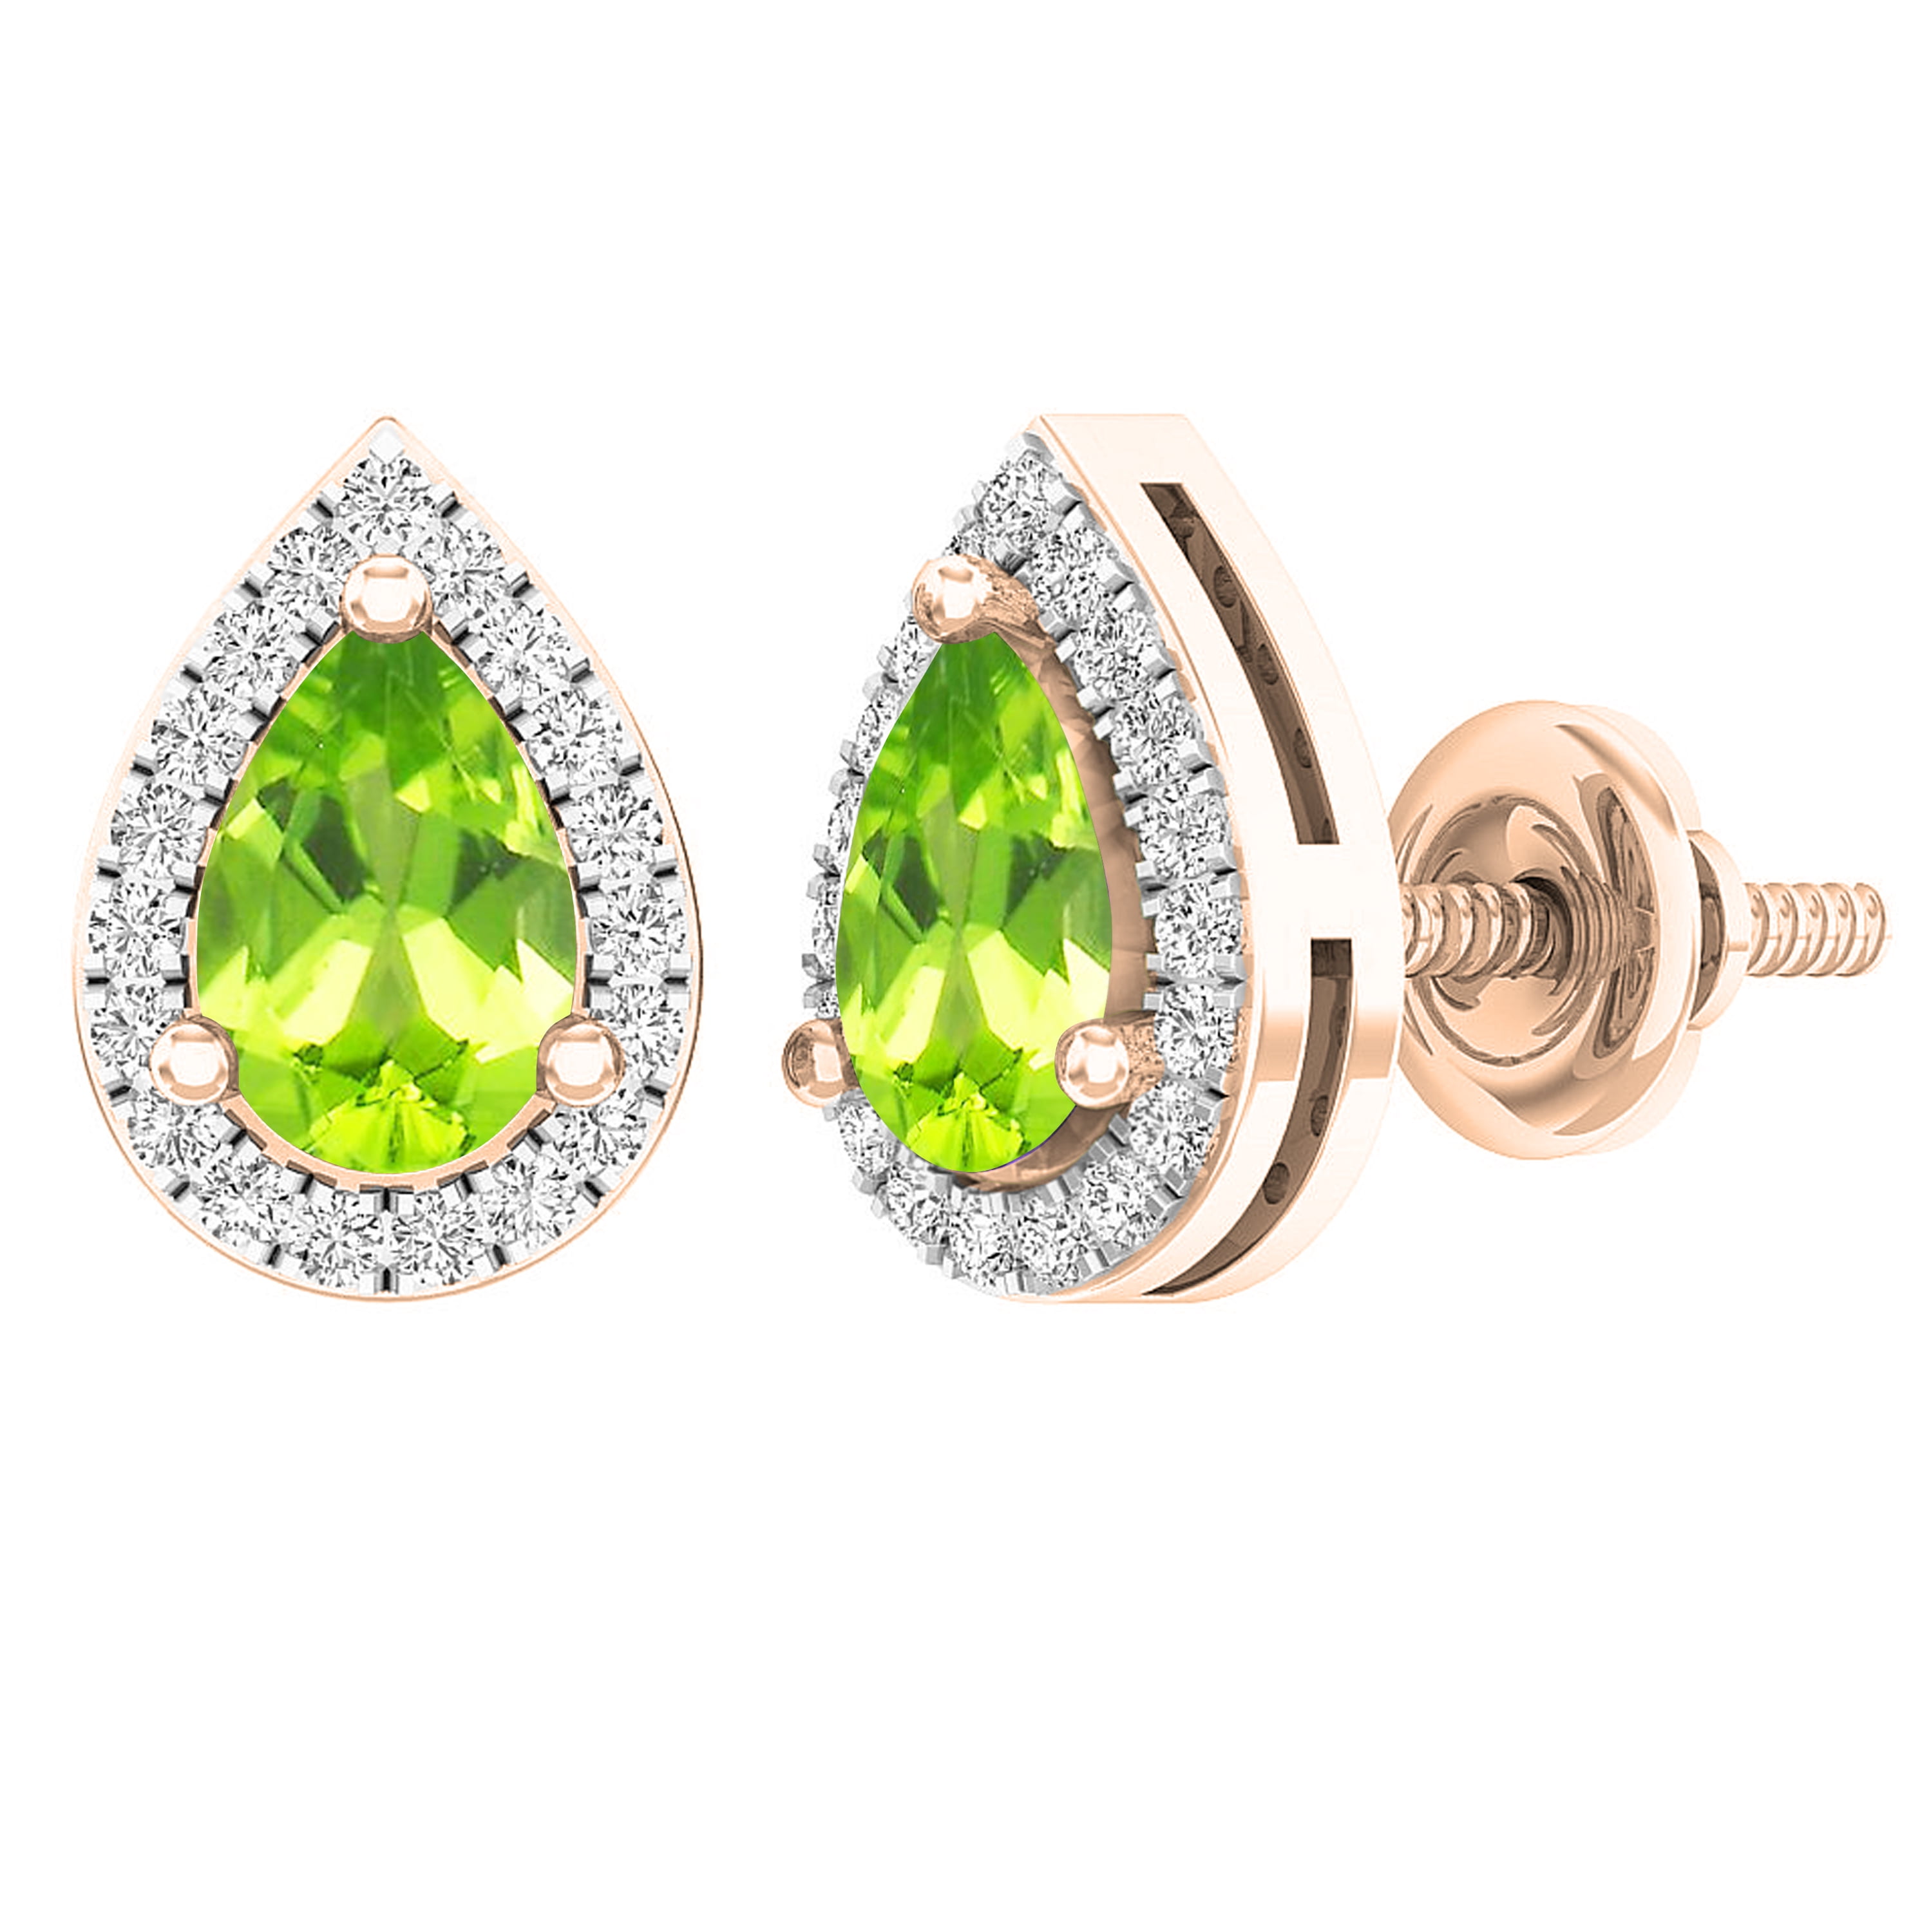 14k Pink Rose Gold Filled Green Simulated Peridot Earrings